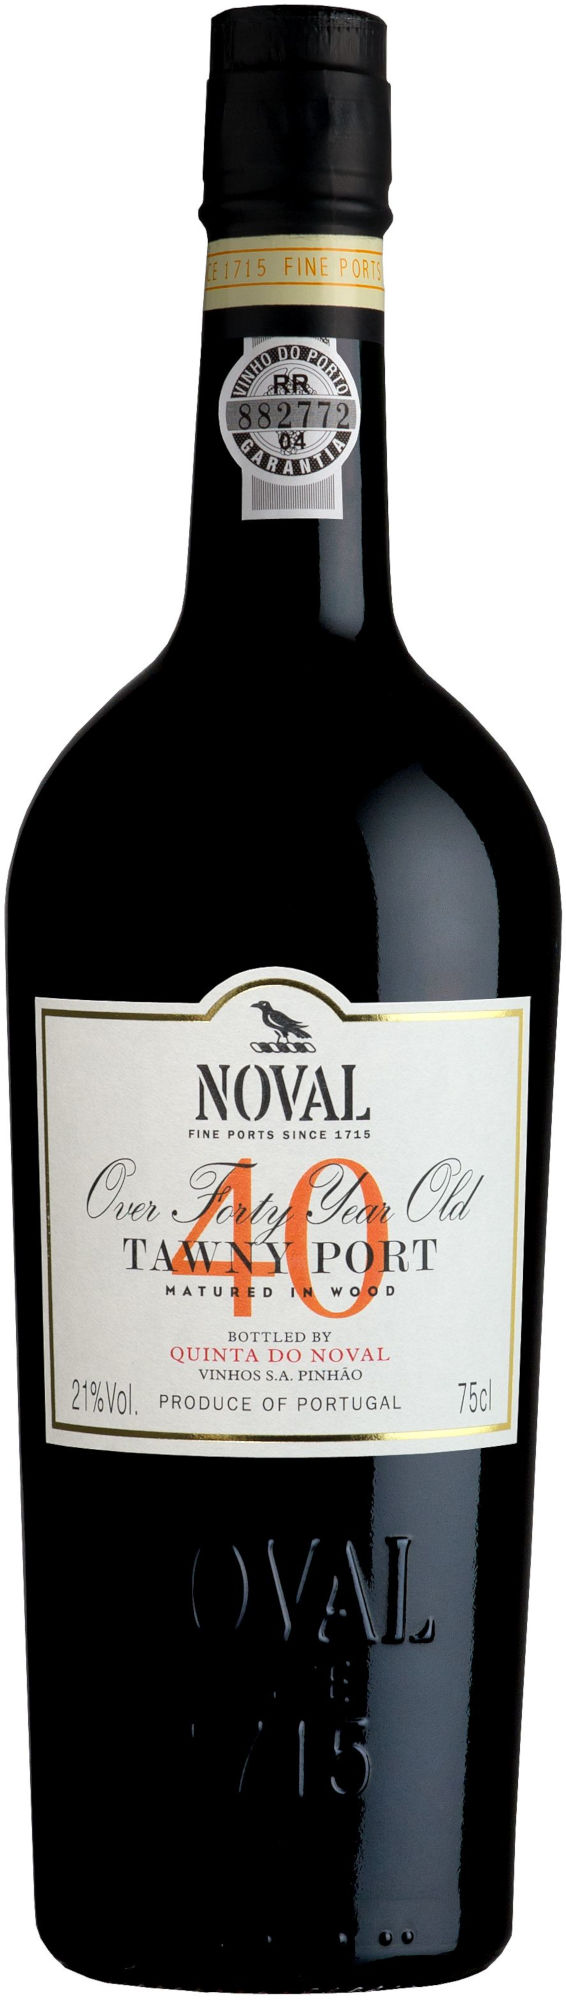 Noval-40-Years-Old-Tawny-Port